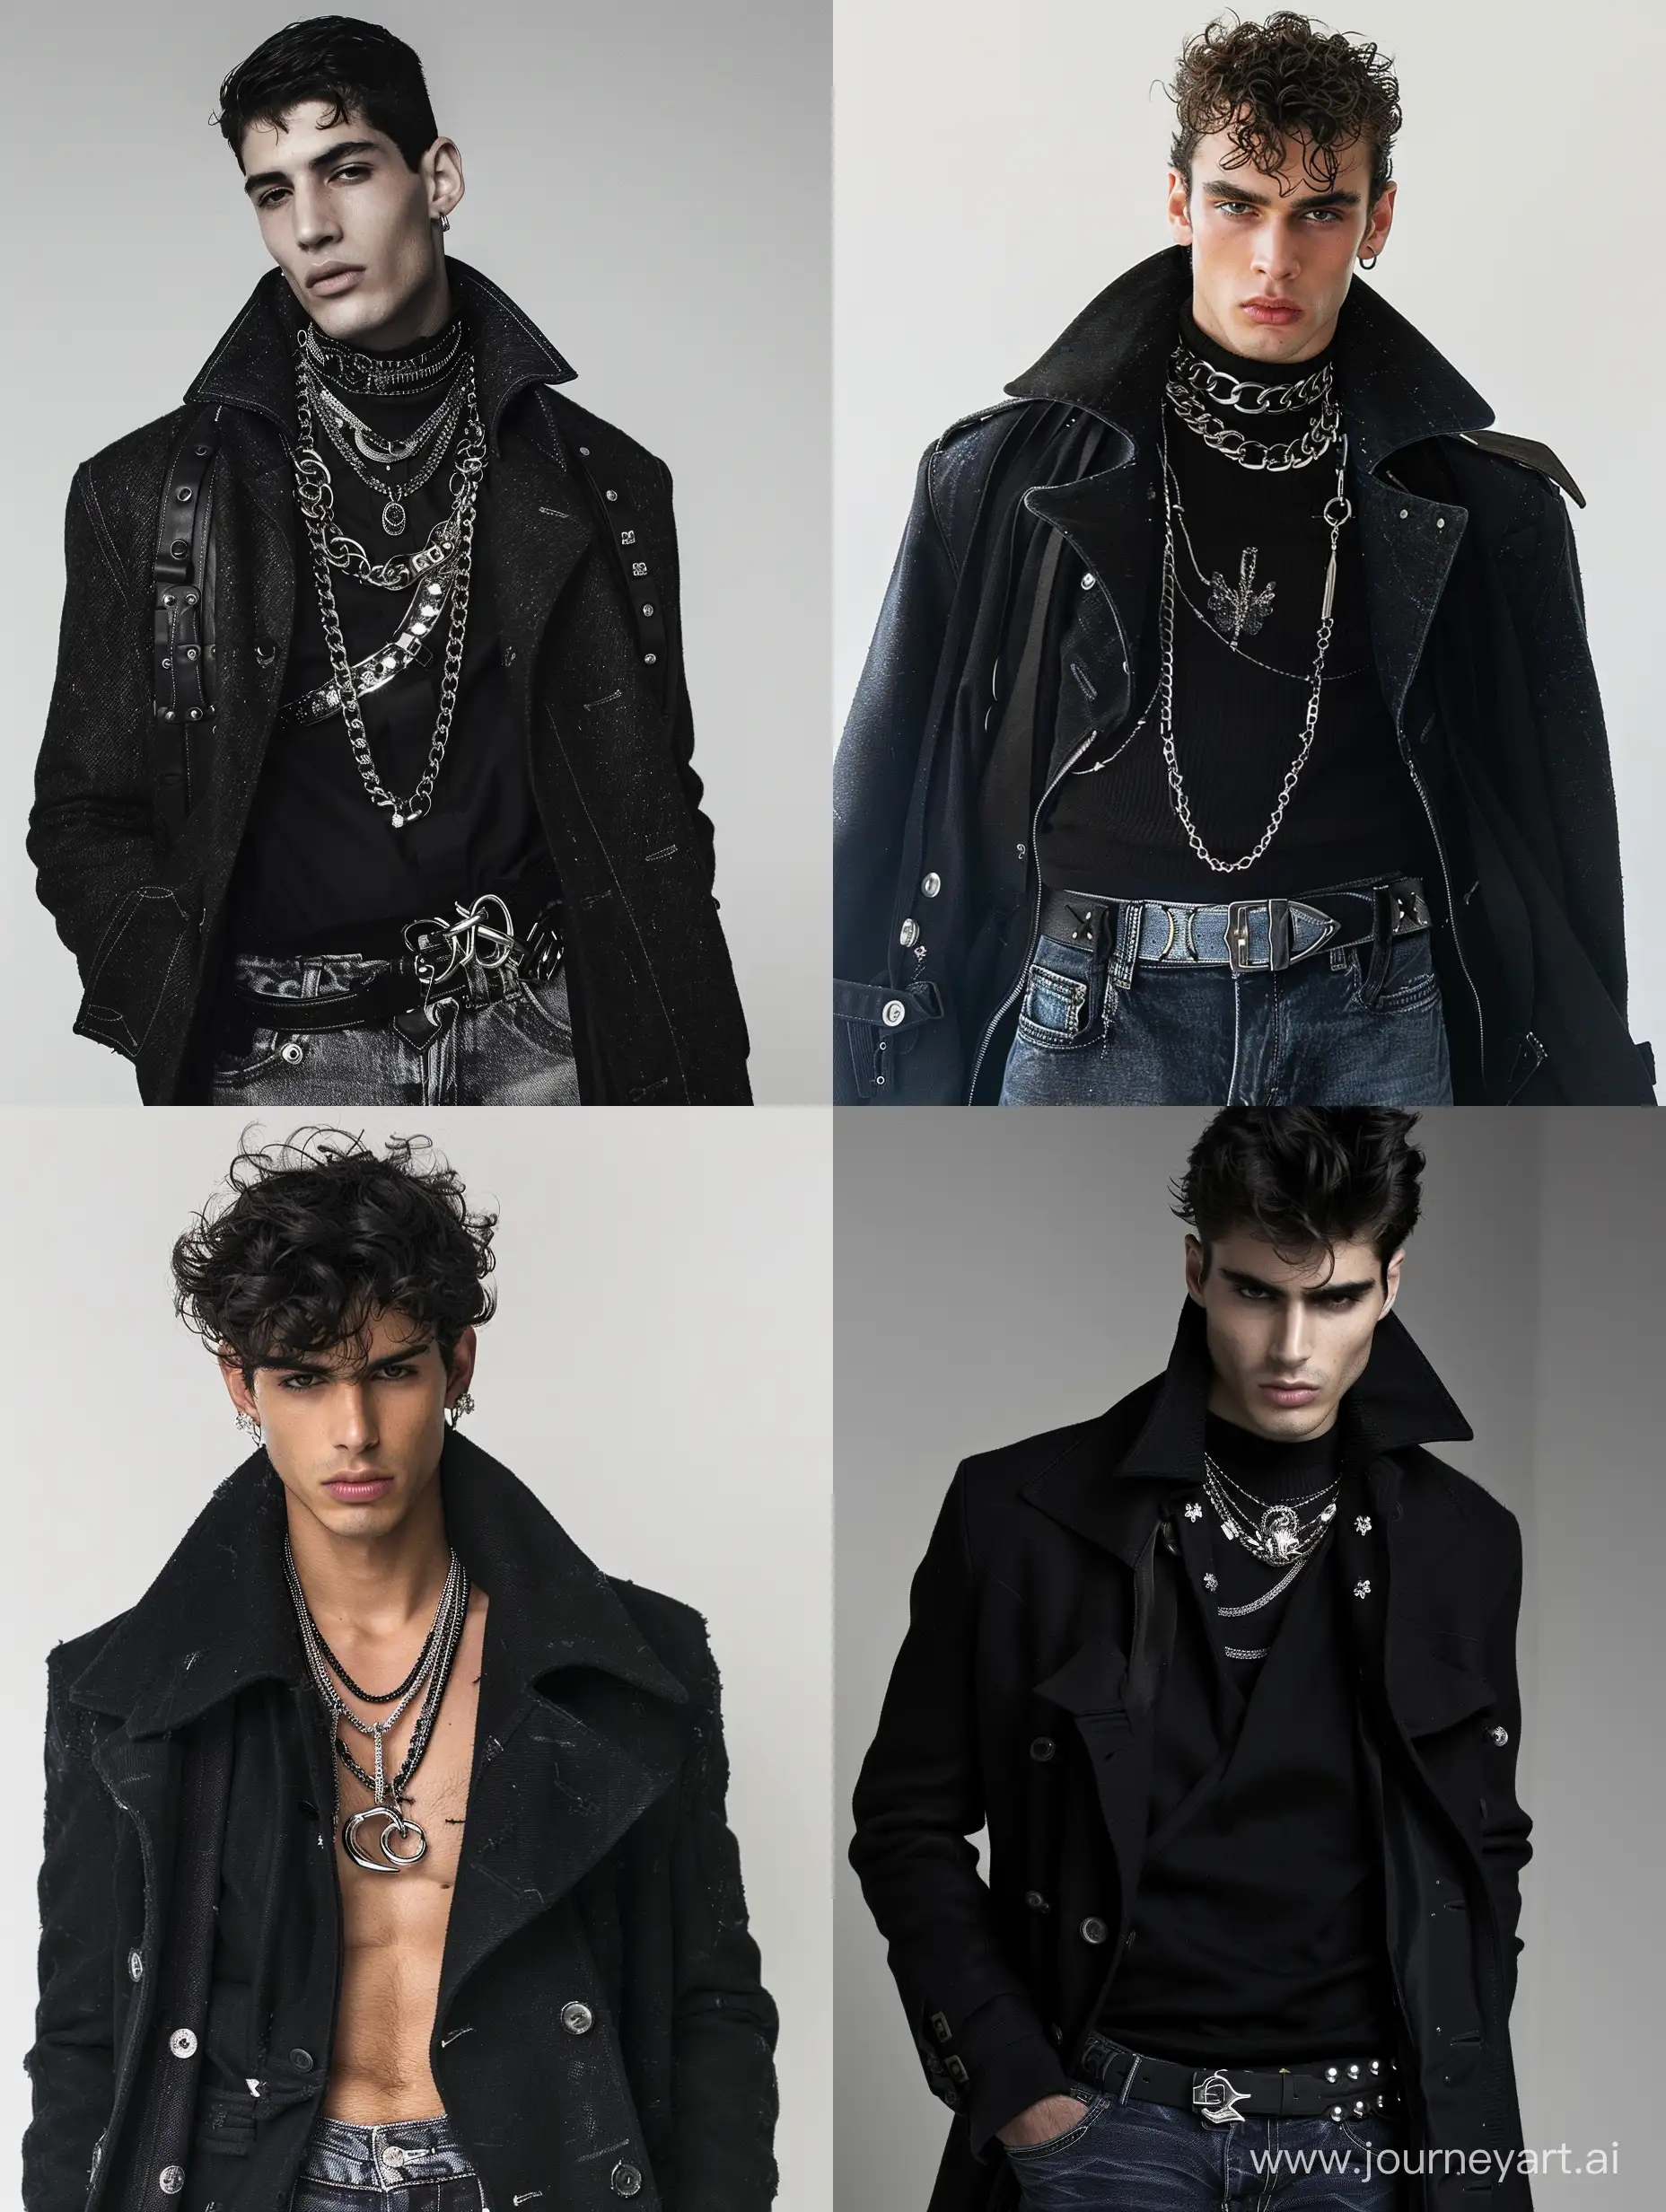 Fashionable-Male-Model-Showcasing-Slim-Fit-Jeans-and-Stylish-Coats-with-Silver-and-Black-Jewelry-by-Carlos-Cordova